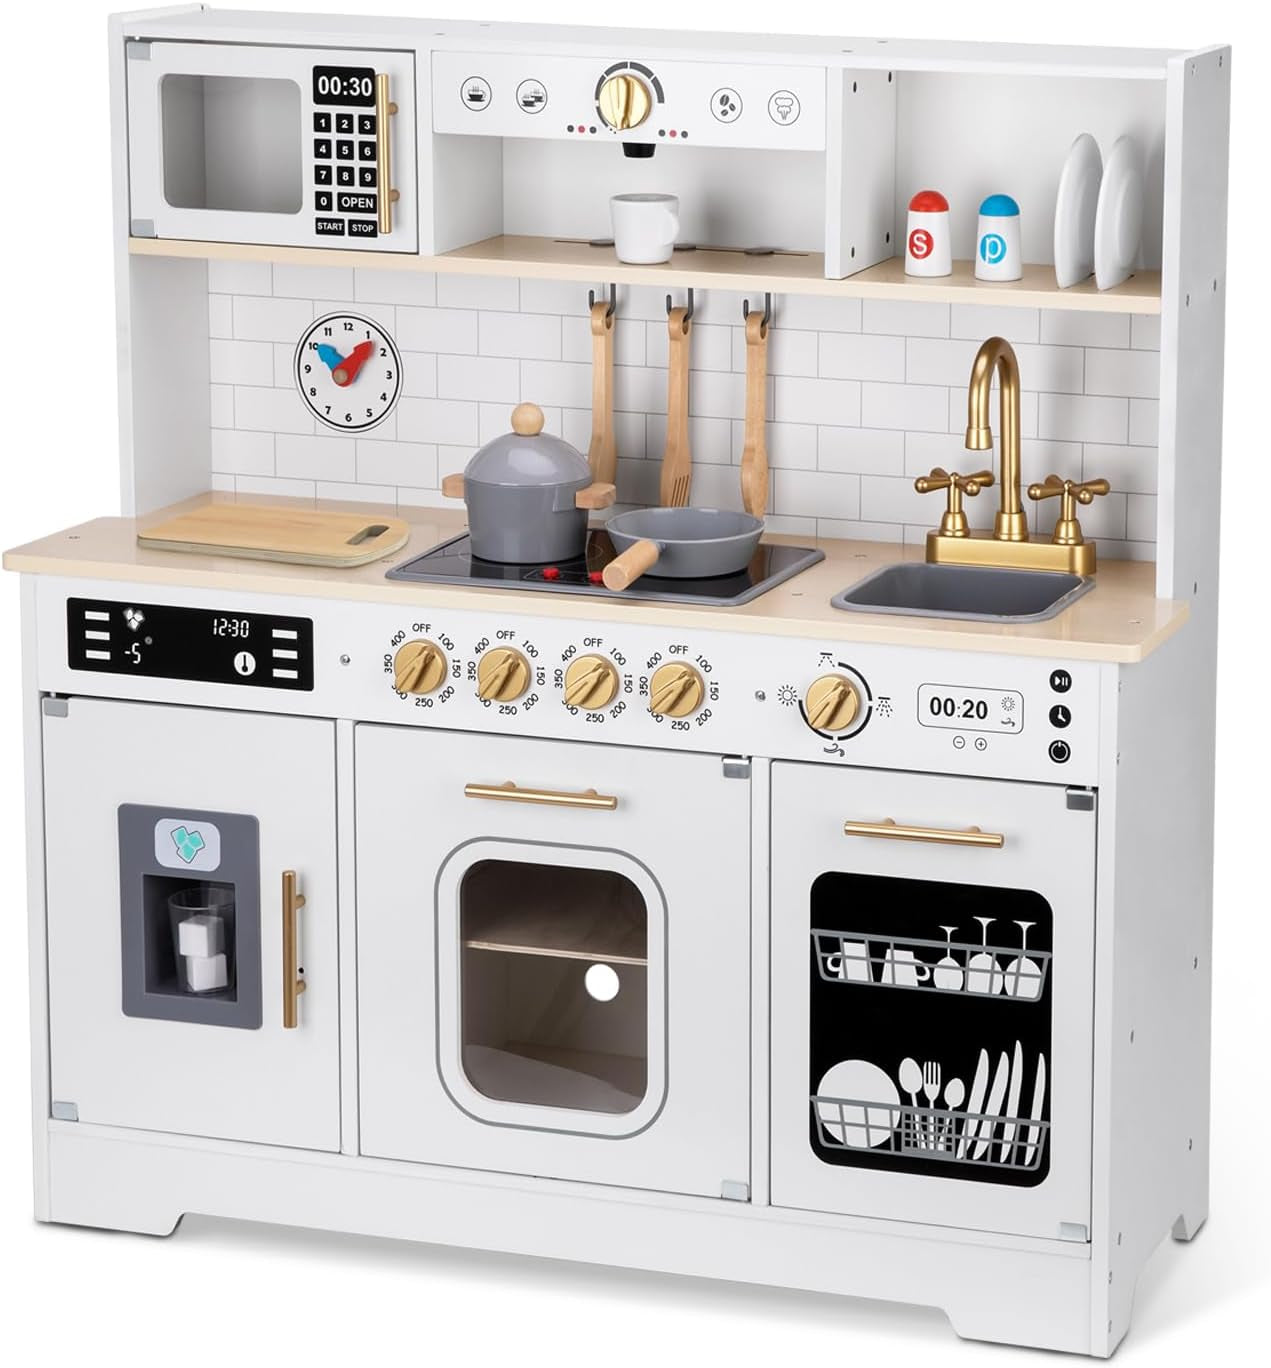 Toddler Kitchen Playset, Play Kitchen Sets for Kids with Plenty of Play Features,Sink,Oven,Range Hood,Stove,Dishwasher,Coffee Maker,Ice Maker and Microwave